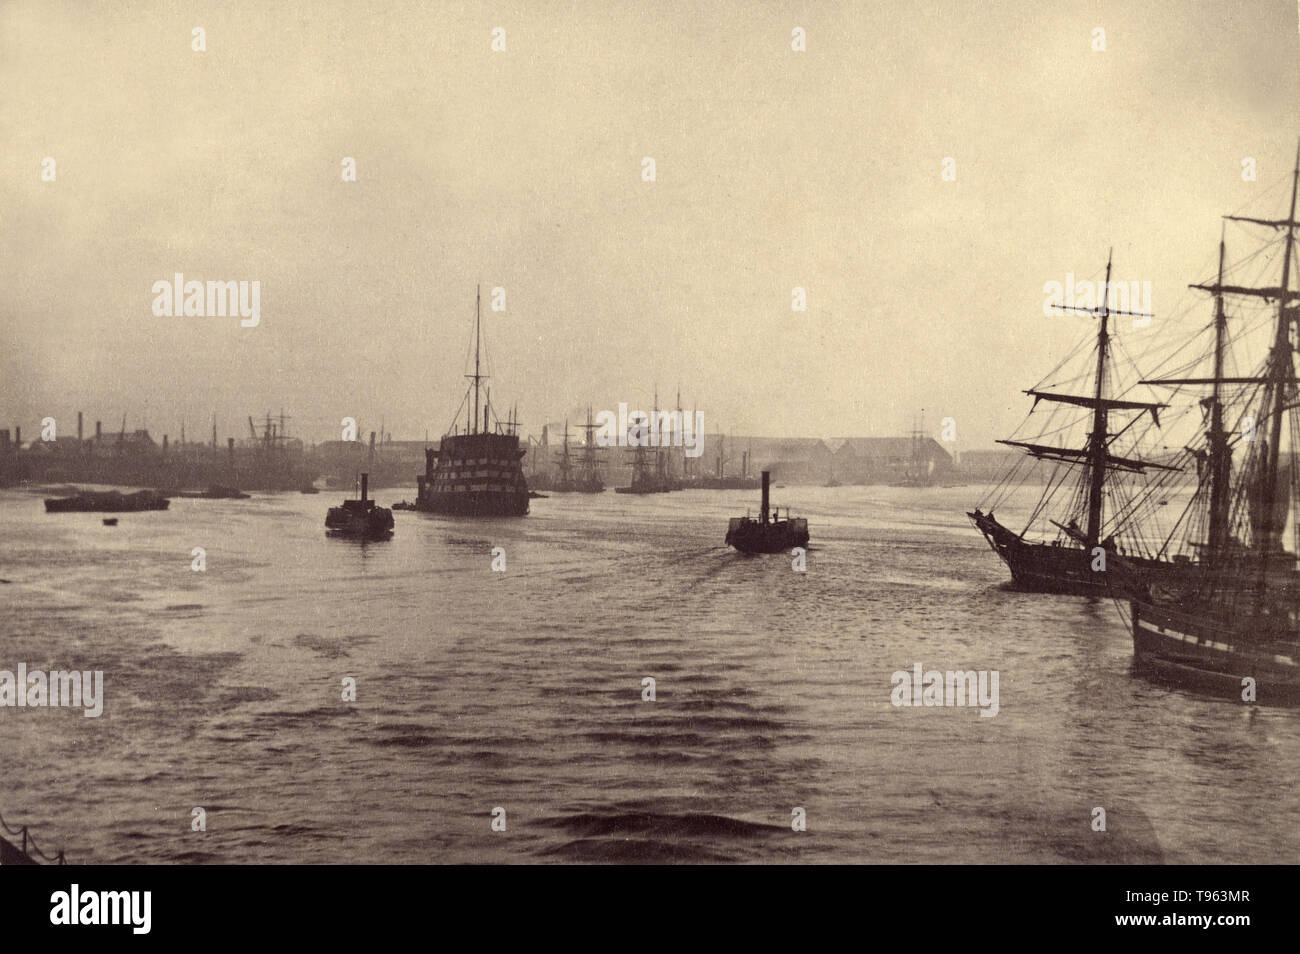 View of ships on the Thames at Greenwich, c. 1870. Photographed by ...